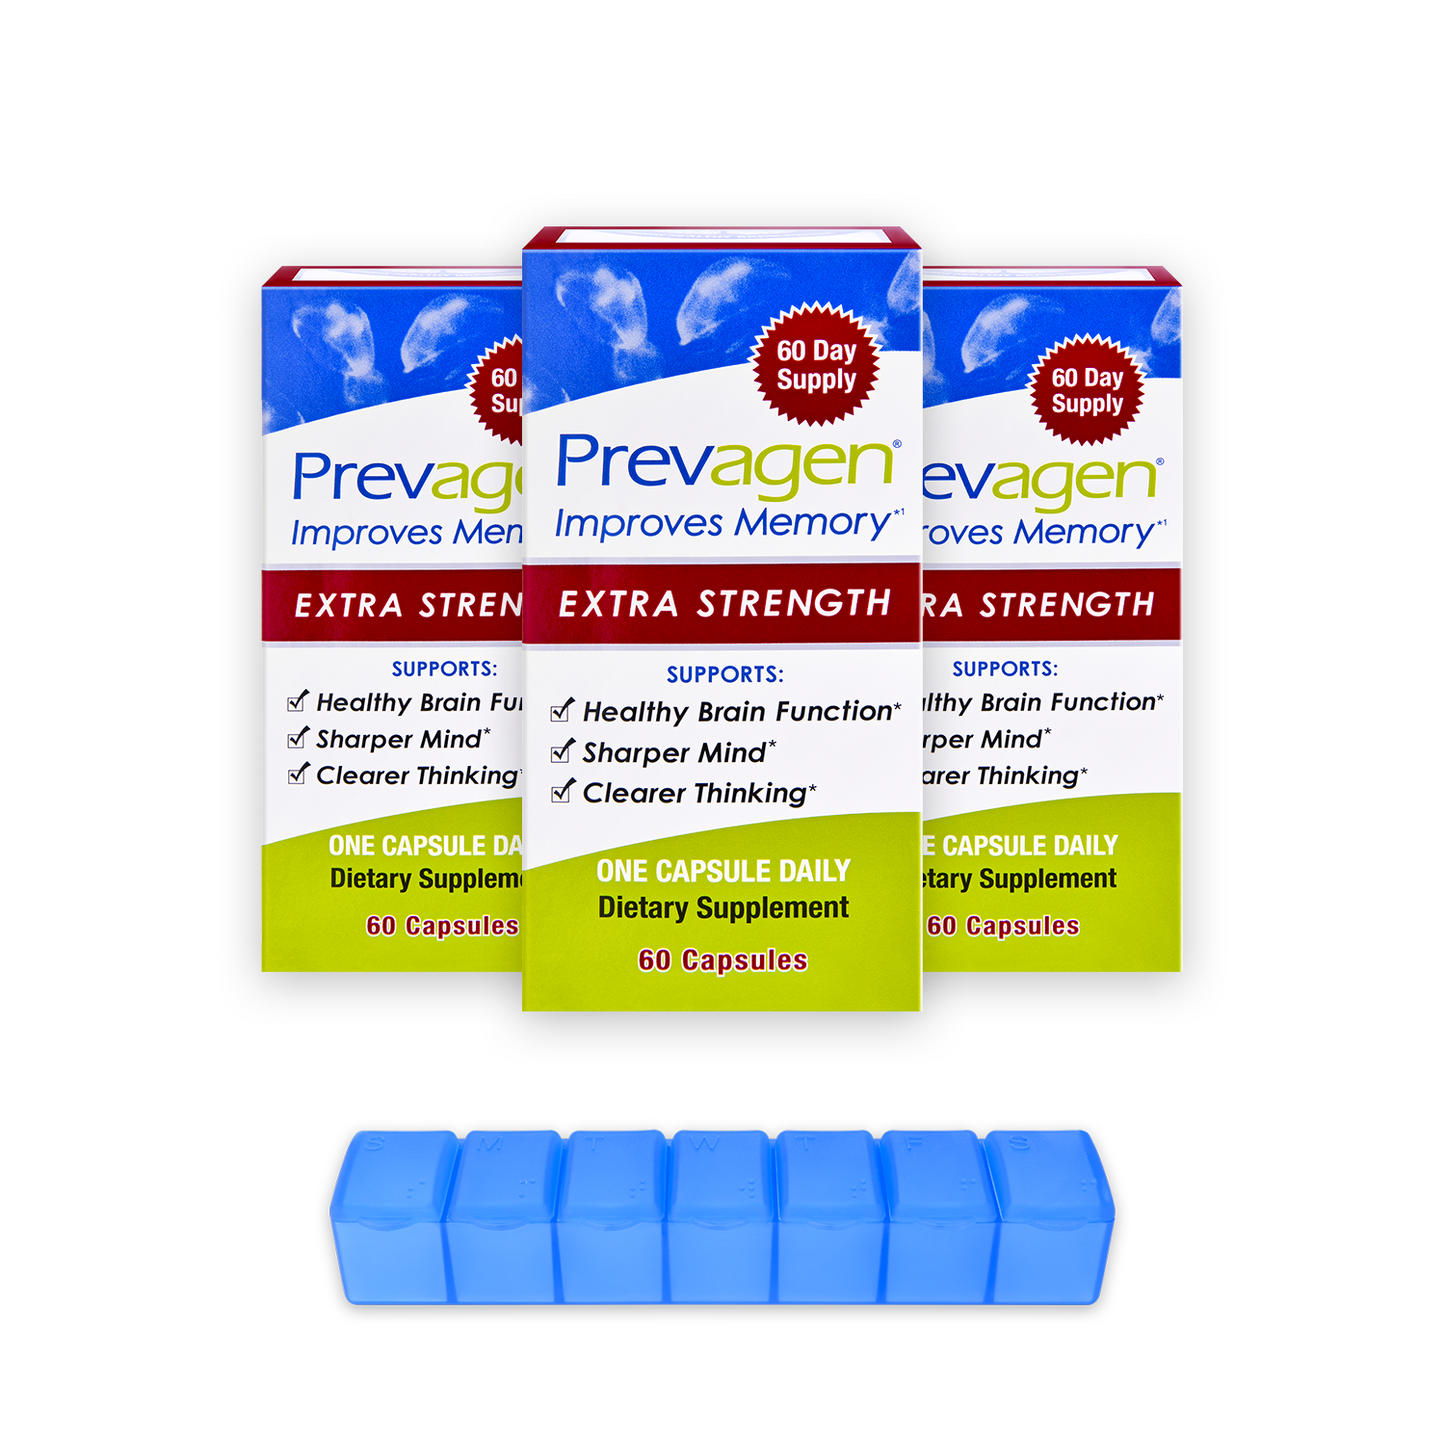 Prevagen® 20mg, 60 Capsules (3-Pack) with Prevagen 7-Day Pill Minder